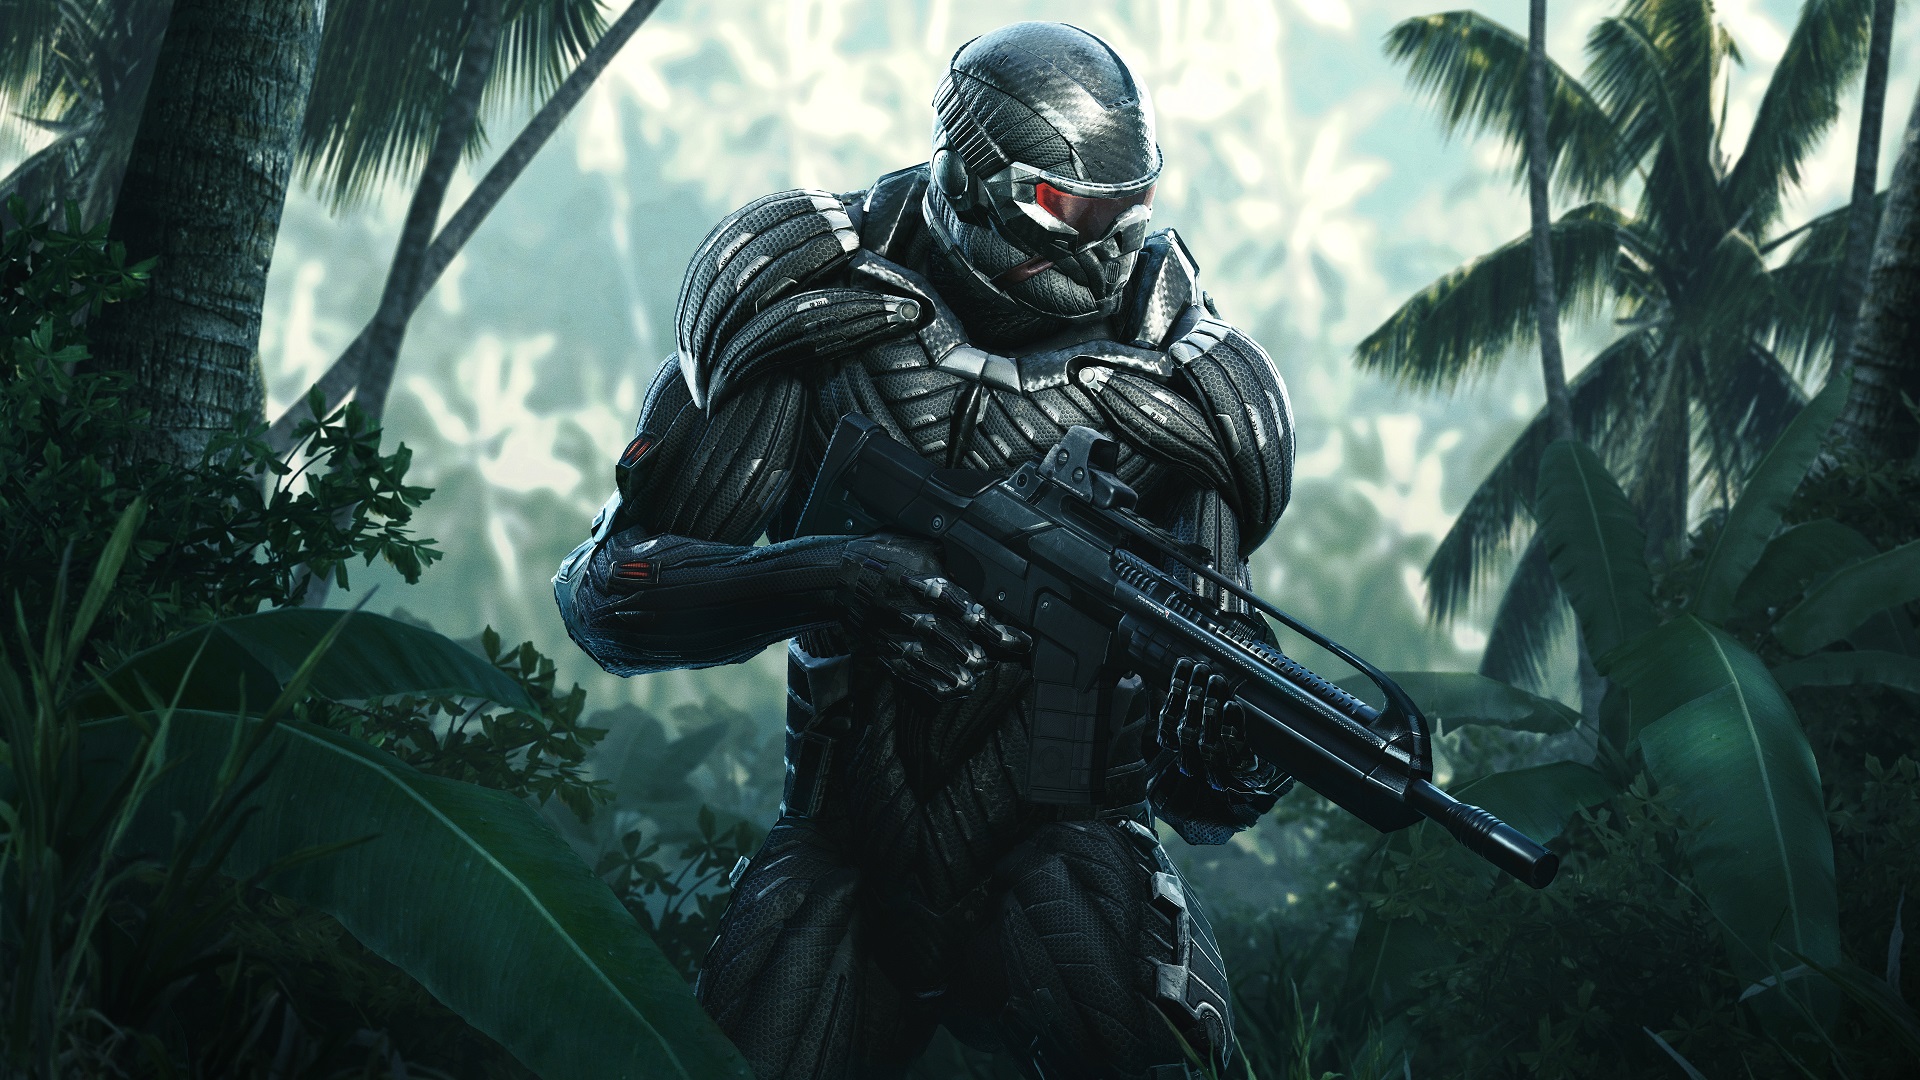 will there be a crysis 4